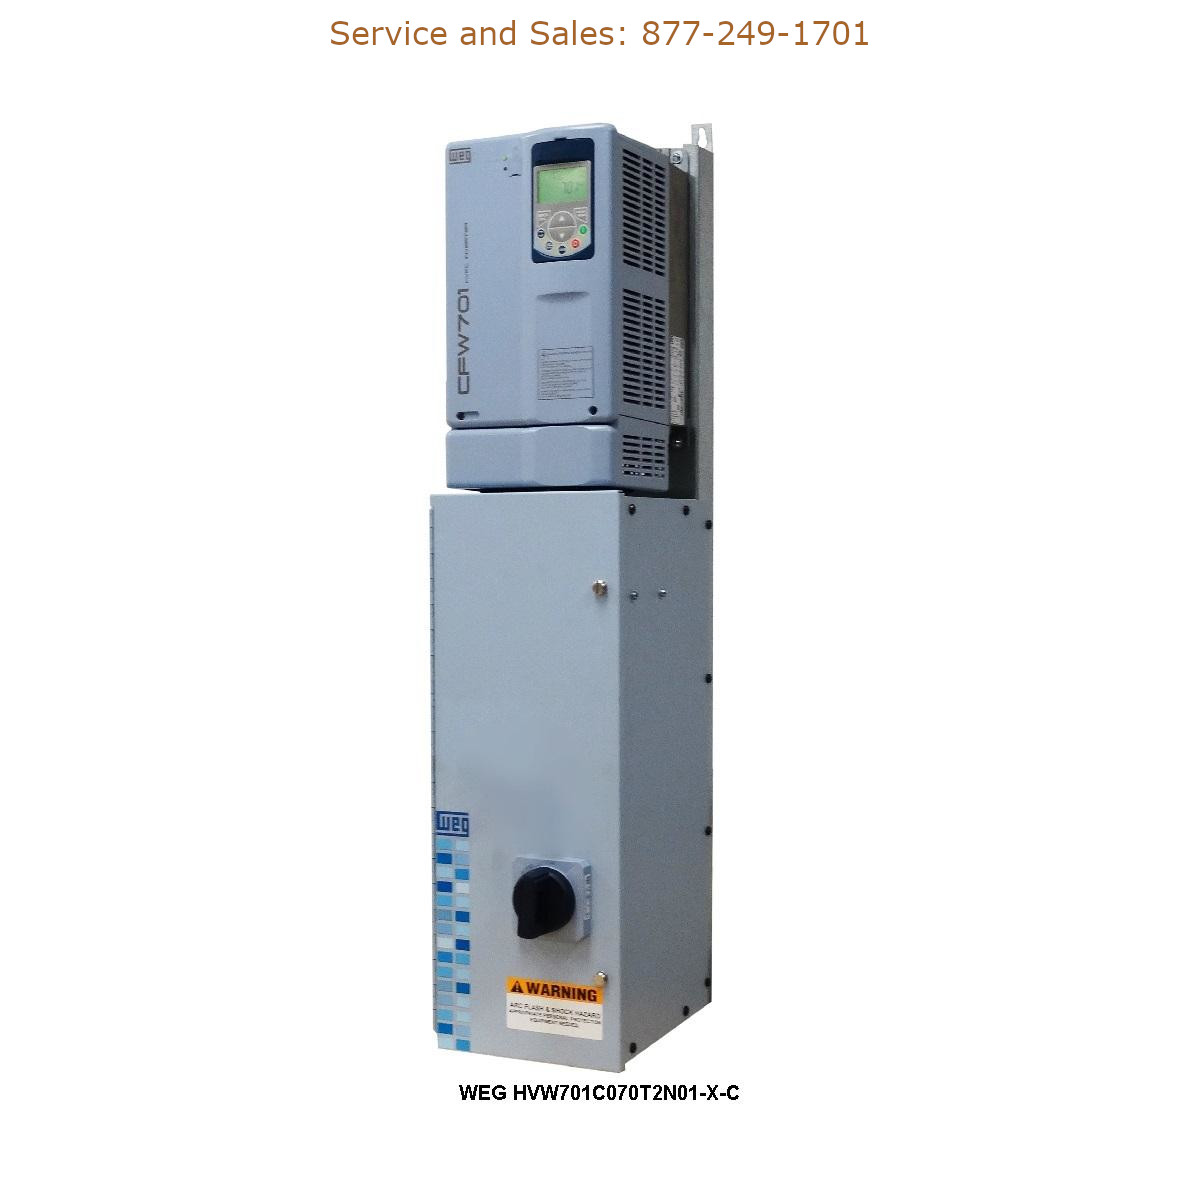 WEG HVW701C070T2N01-X-C WEG Model Number HVW701C070T2N01-X-C WEG Drives, Variable Speed Drives Repair Service, Troubleshooting, Replacement Parts https://gesrepair.com/wp-content/uploads/2022/WEG/WEG_HVW701C070T2N01-X-C_Drives_Variable_Speed_Drives.jpg